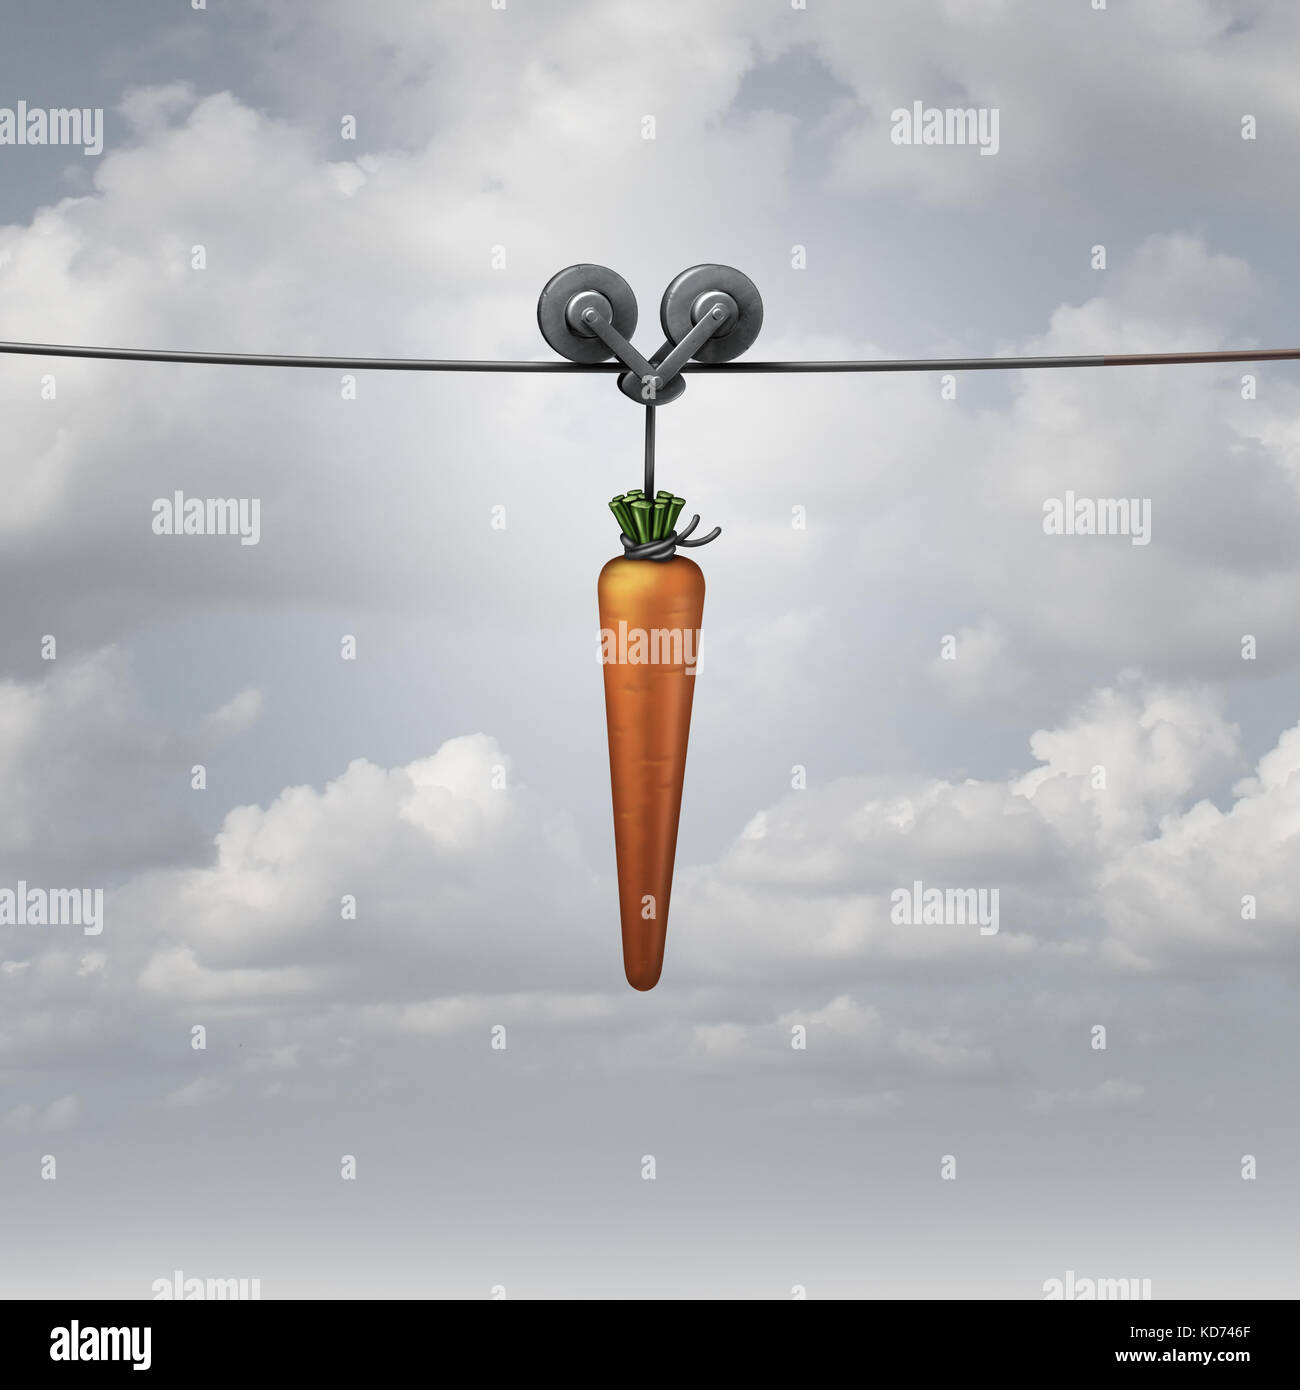 Enticement and motivation concept as a carrot pulled on a wire as a metaphor for marketing reward to attract and encourage a followed. Stock Photo